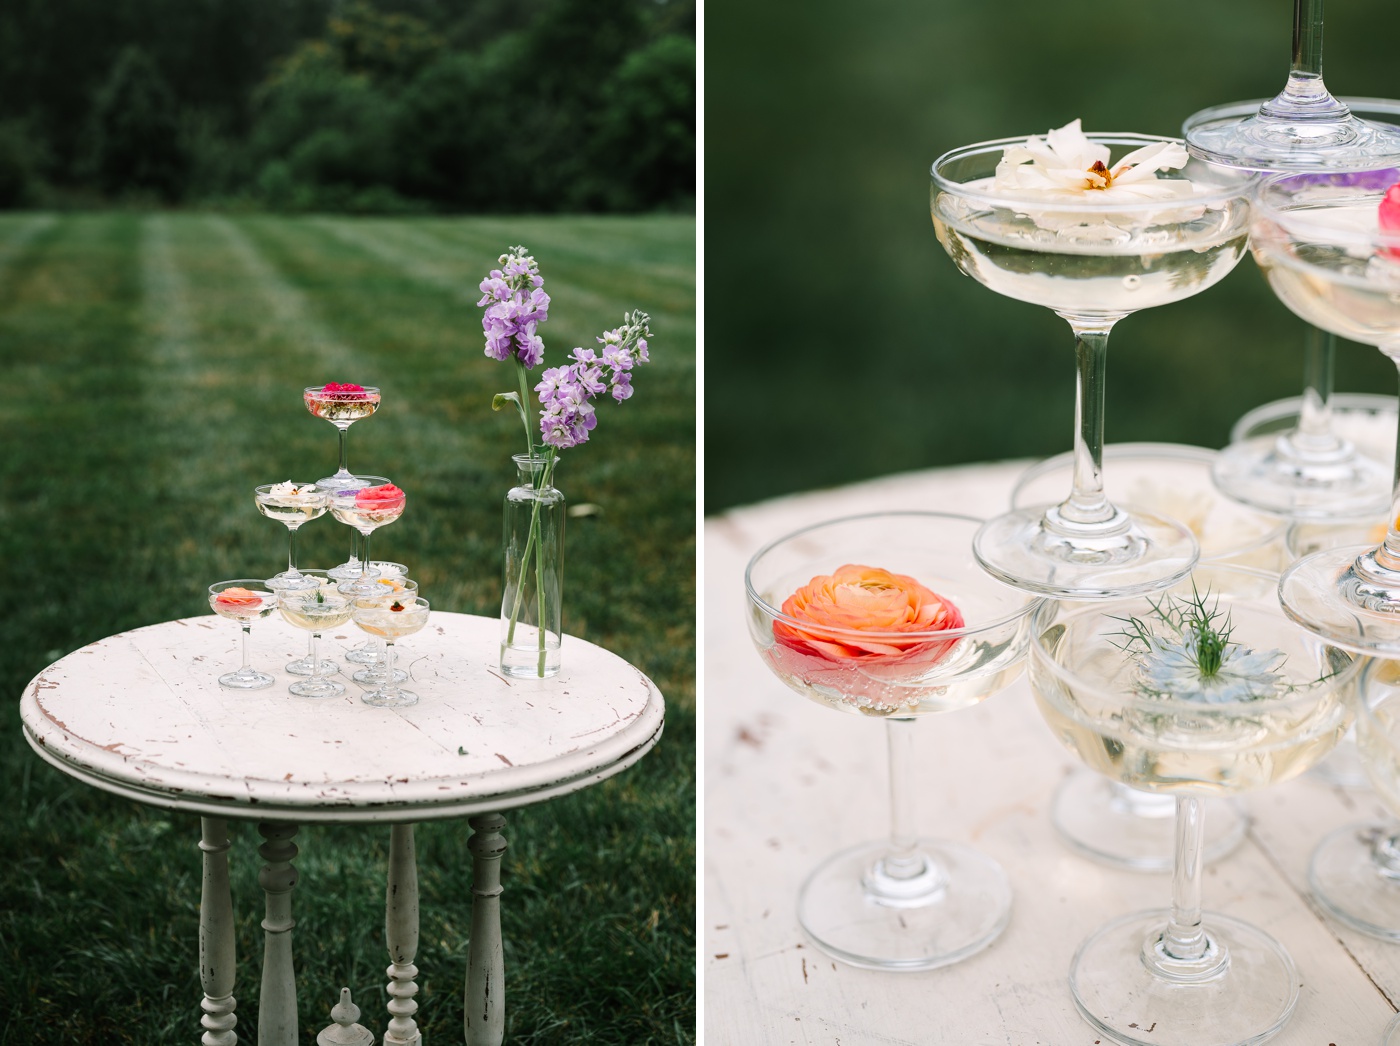 Spring champagne tower with fresh flowers